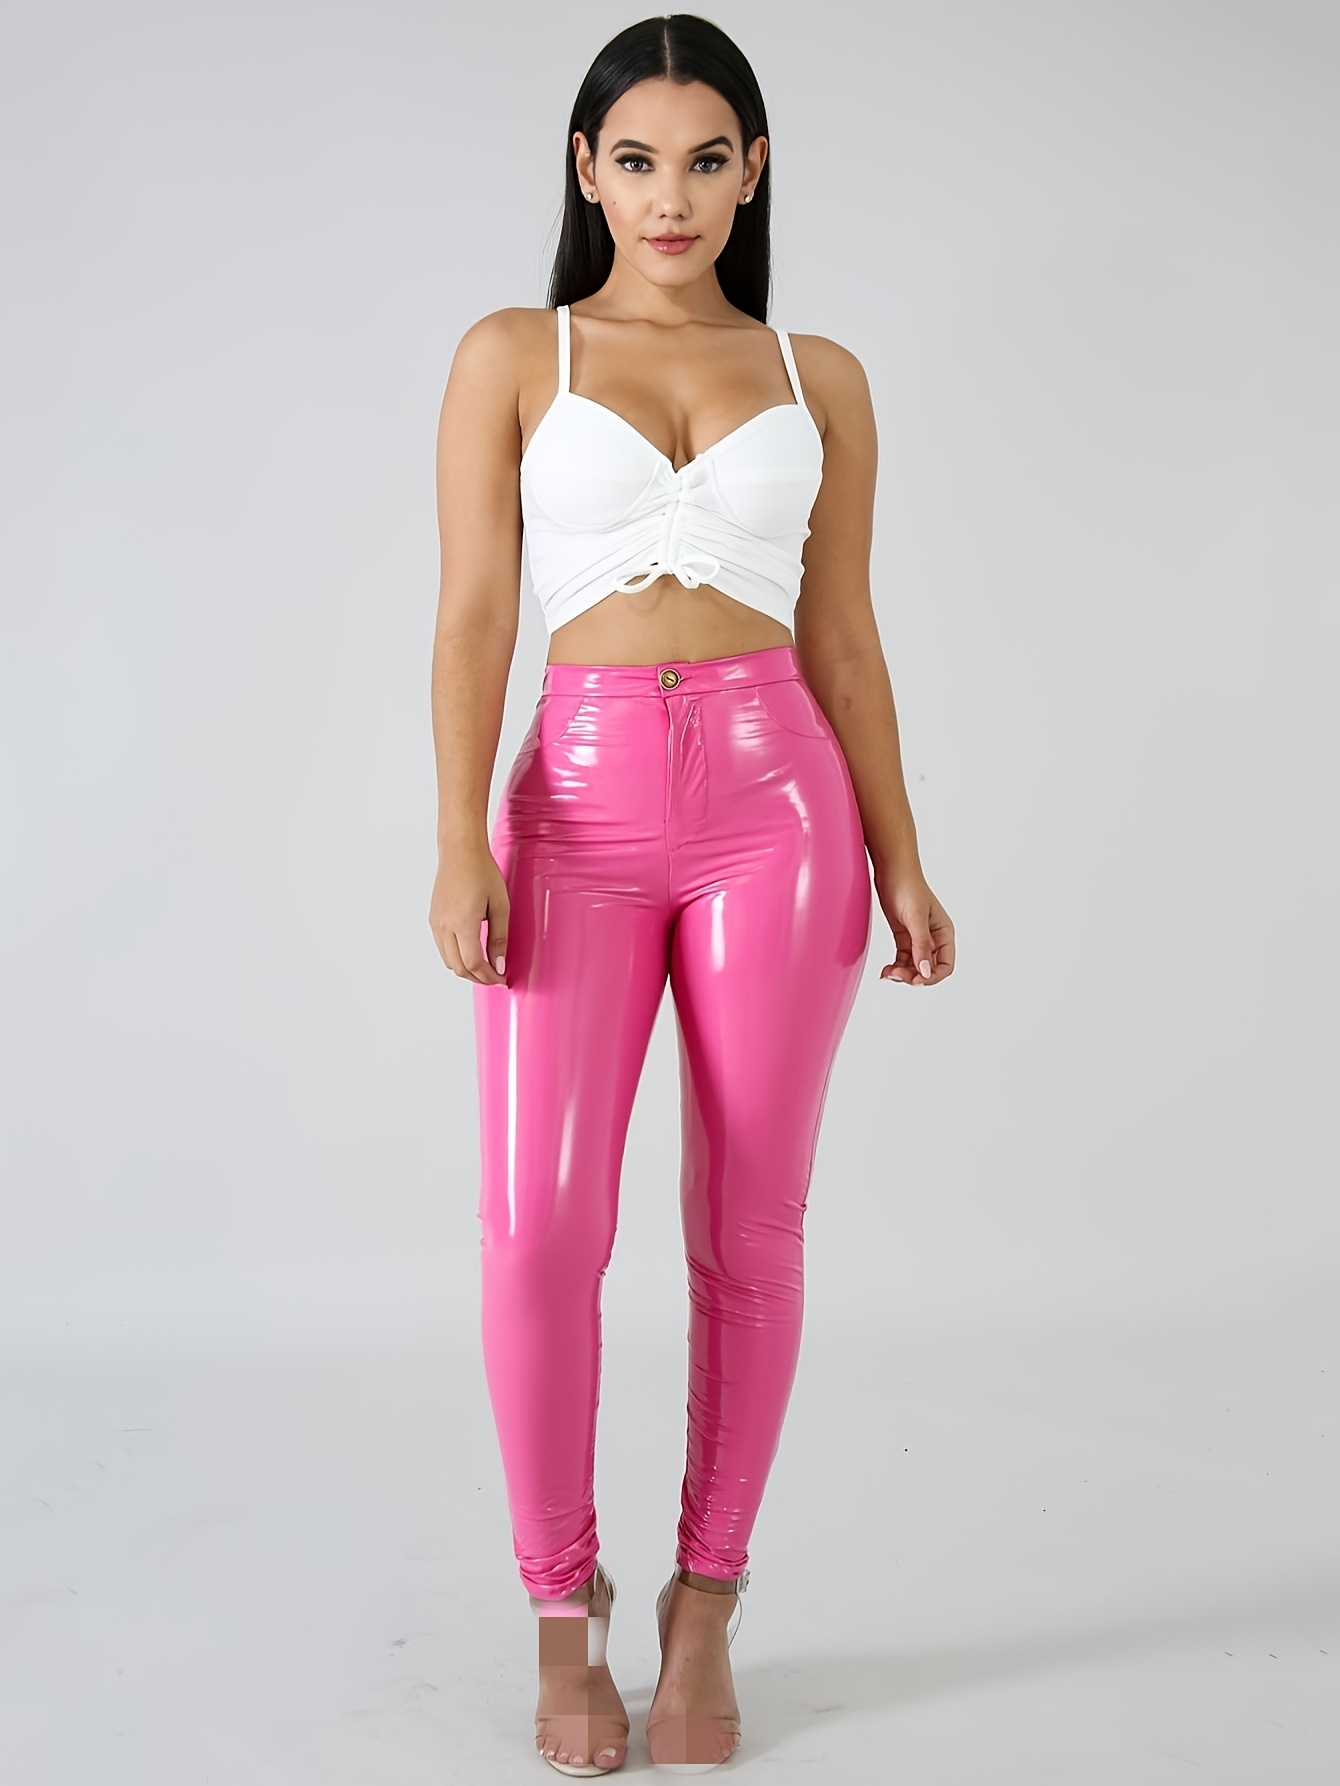 Women's Solid Faux Pu Leather Pants High Waist Skinny Pencil